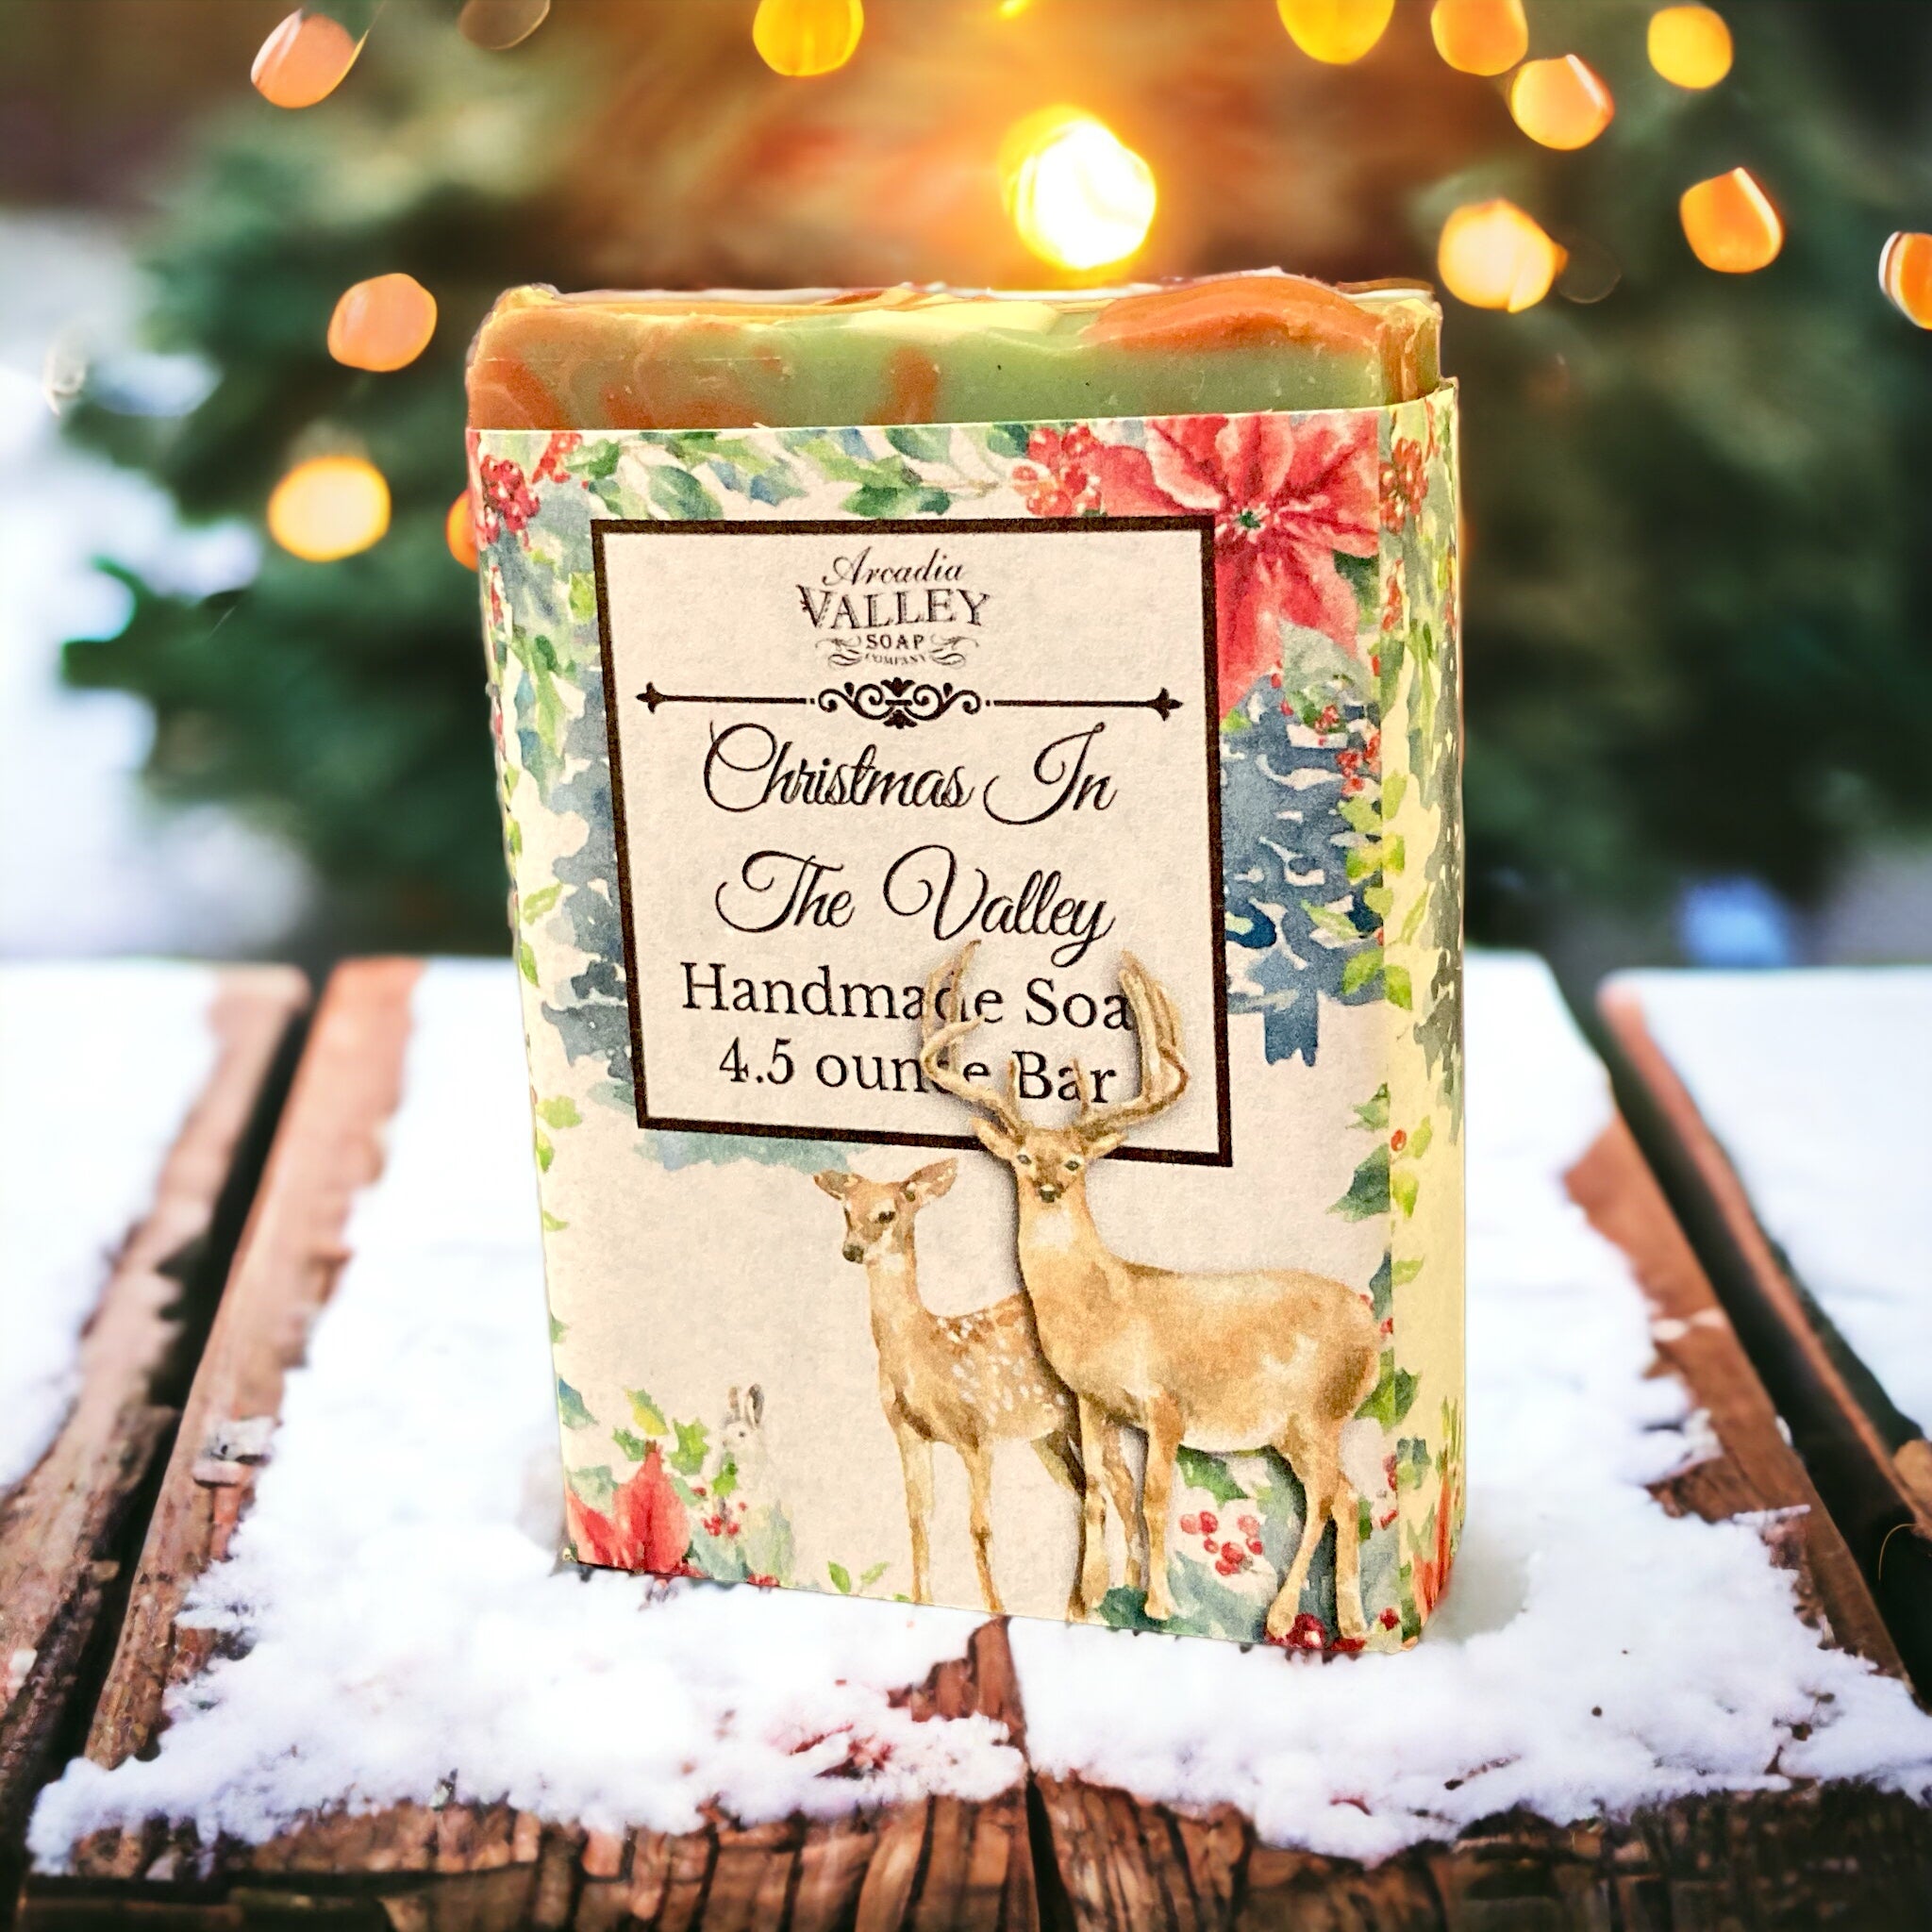 Christmas in the Valley Handmade Soap